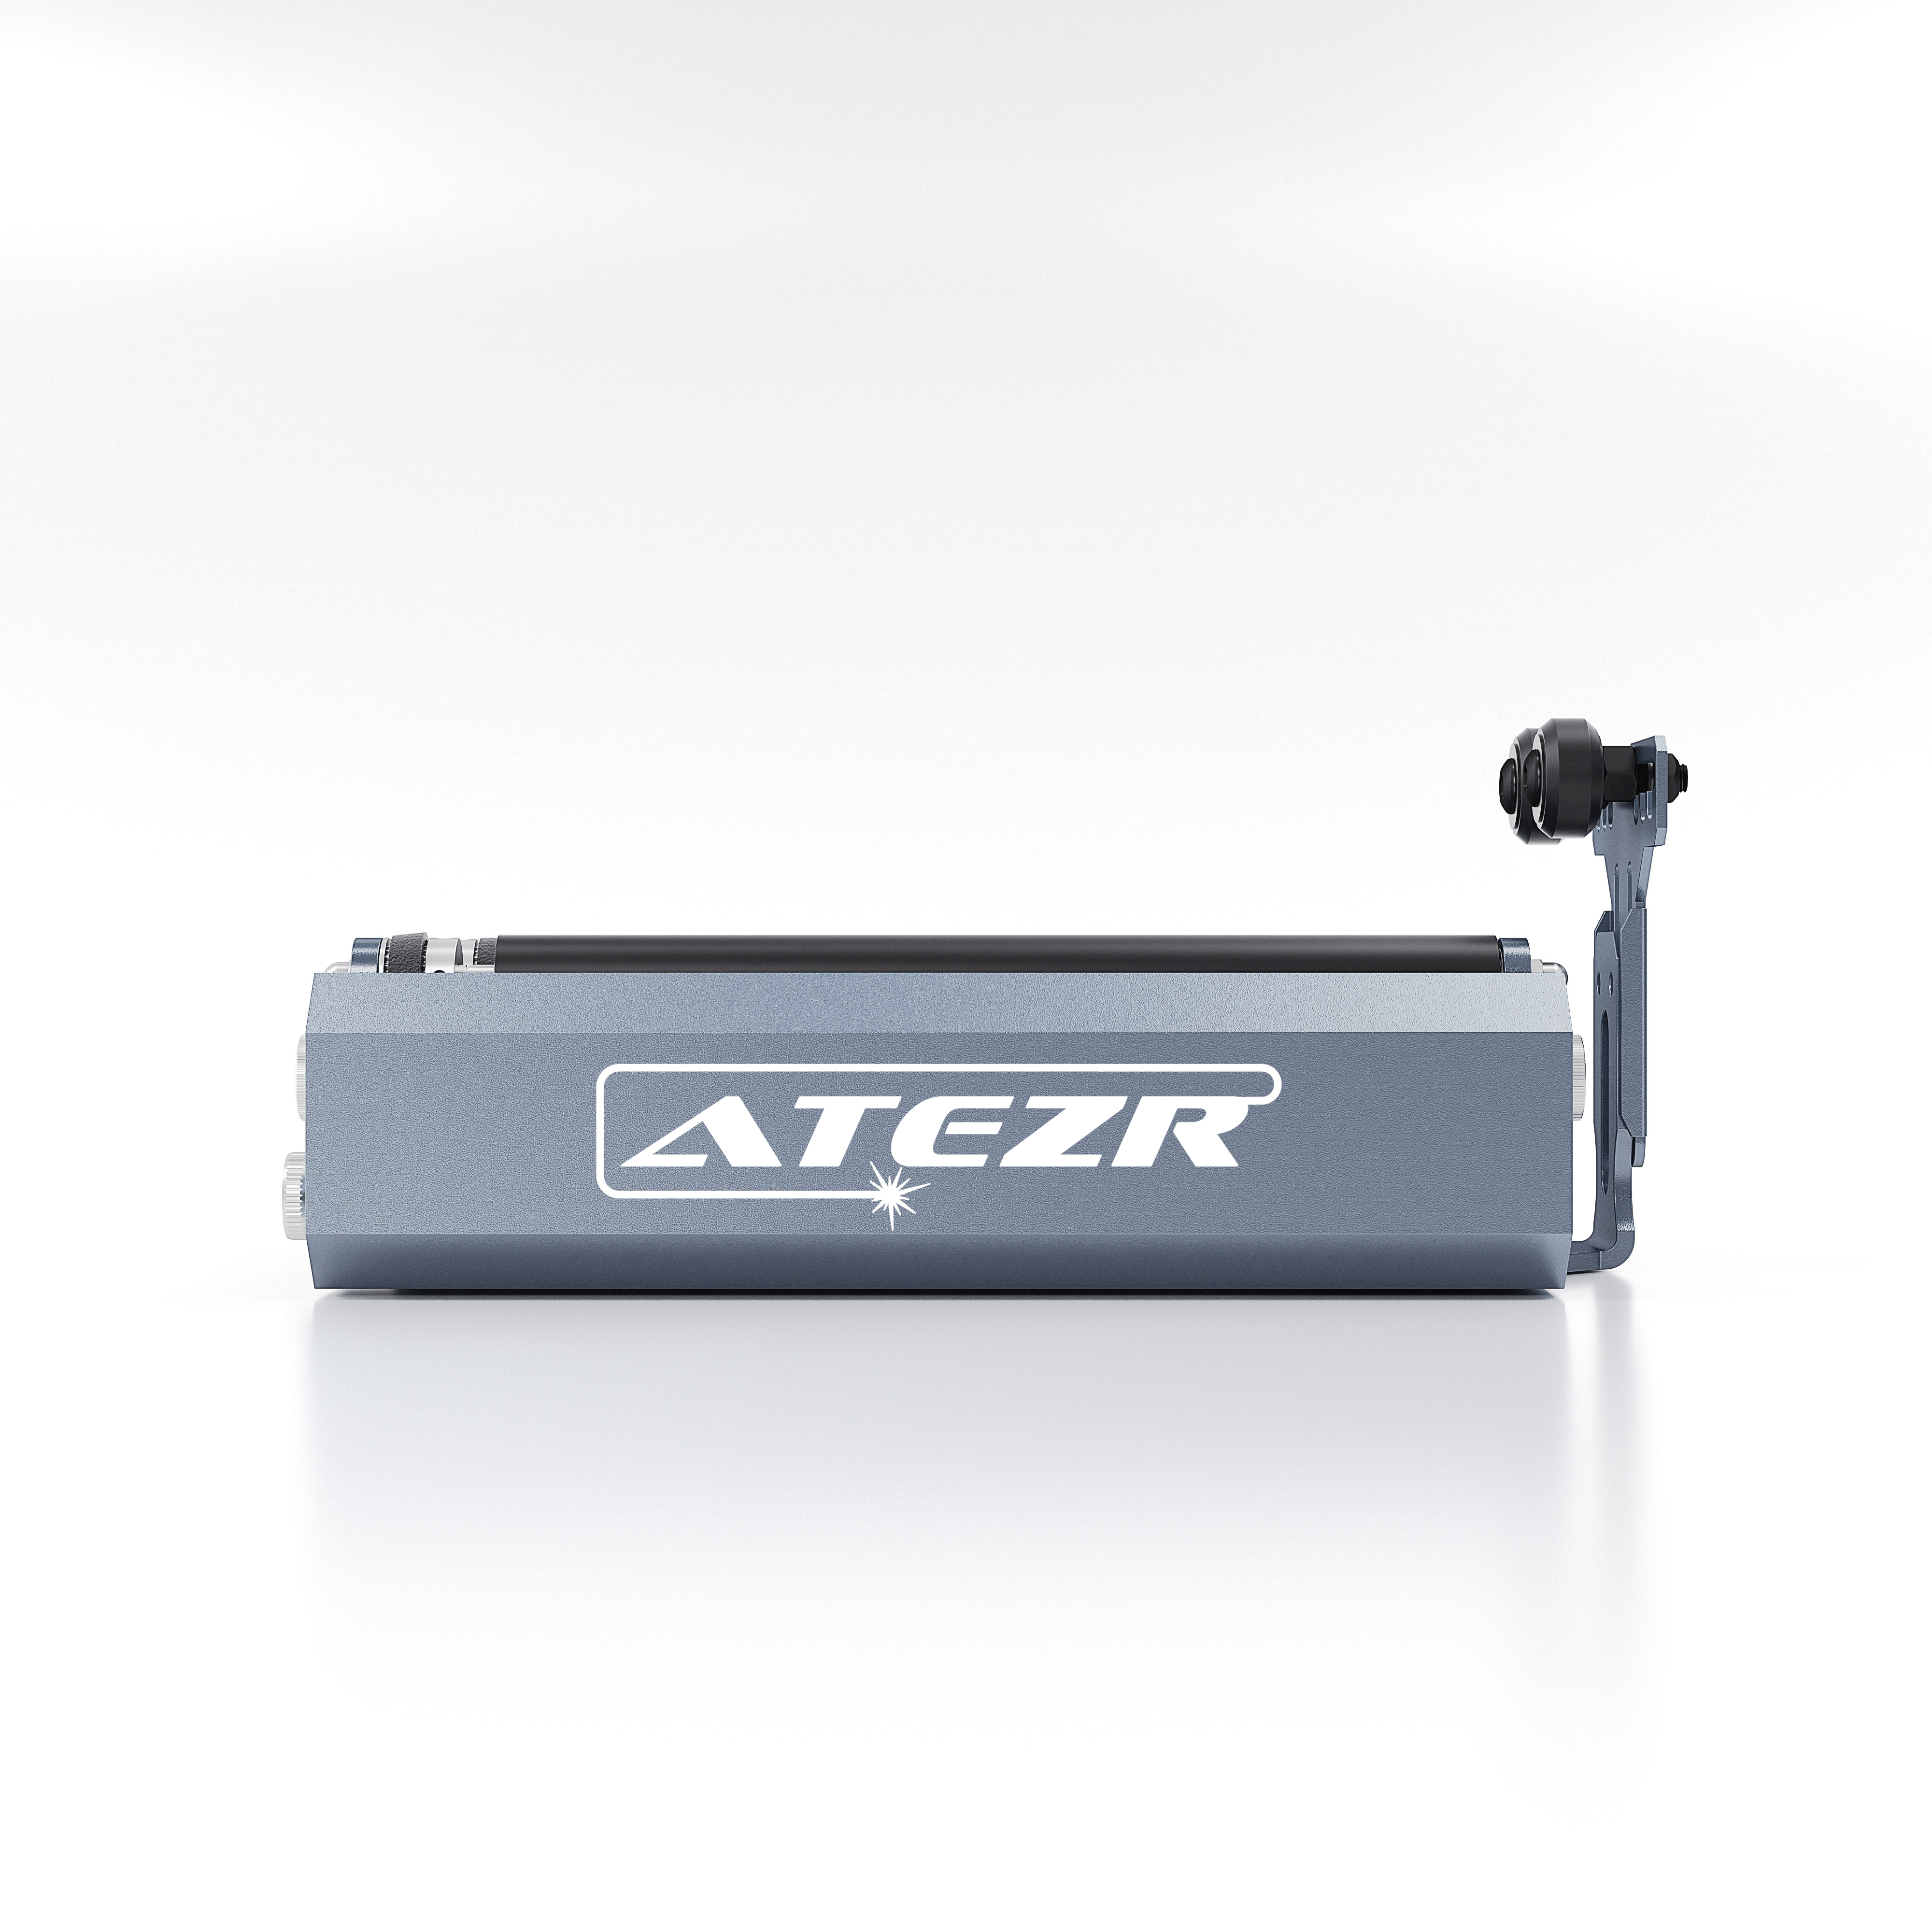 ATEZR KR Rotary Roller For Laser Egraving machine [Pre-oreder]